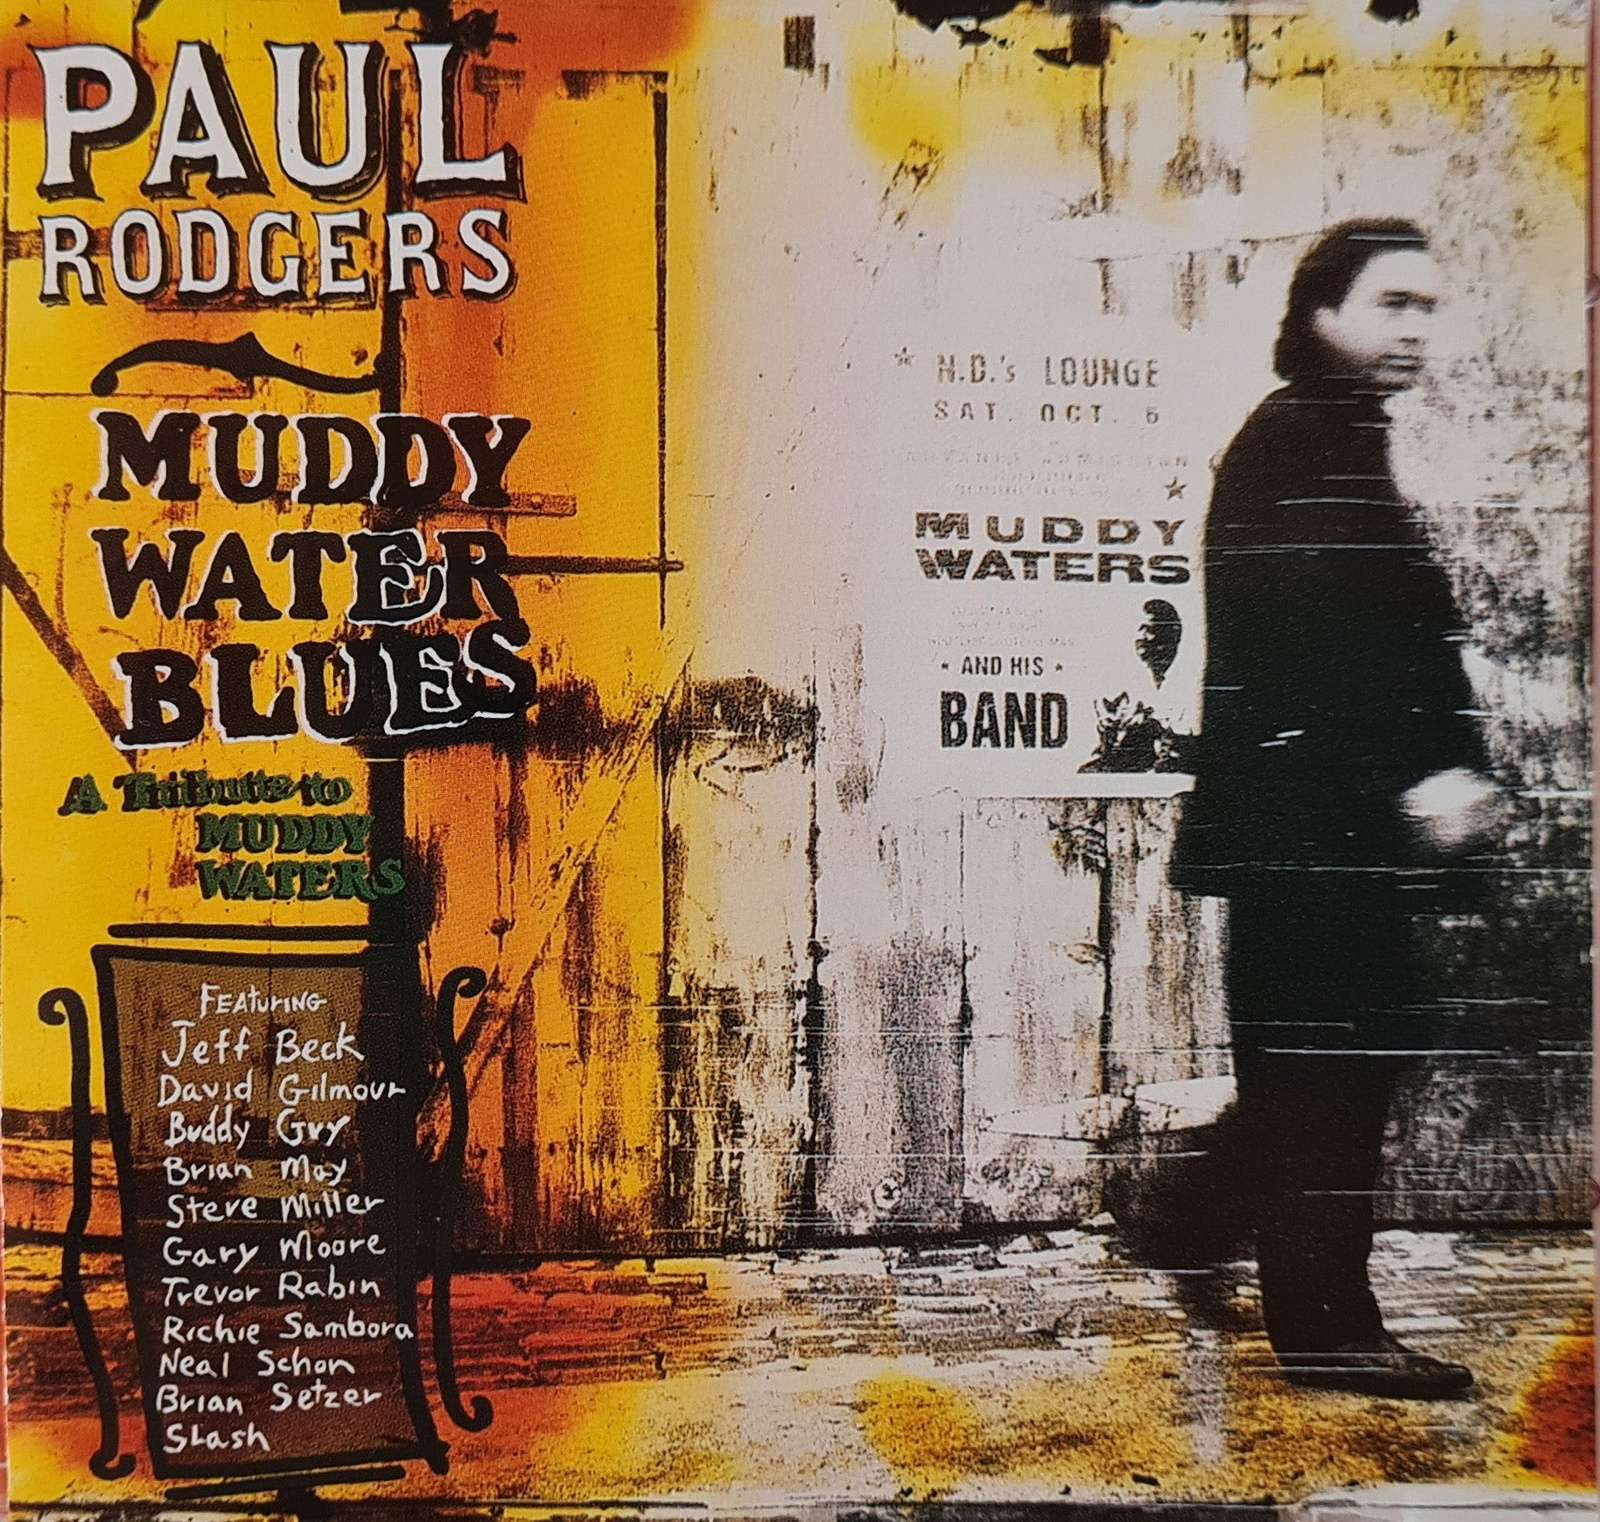 Paul Rodgers - Muddy Water Blues - A Tribute to Muddy Waters (CD)